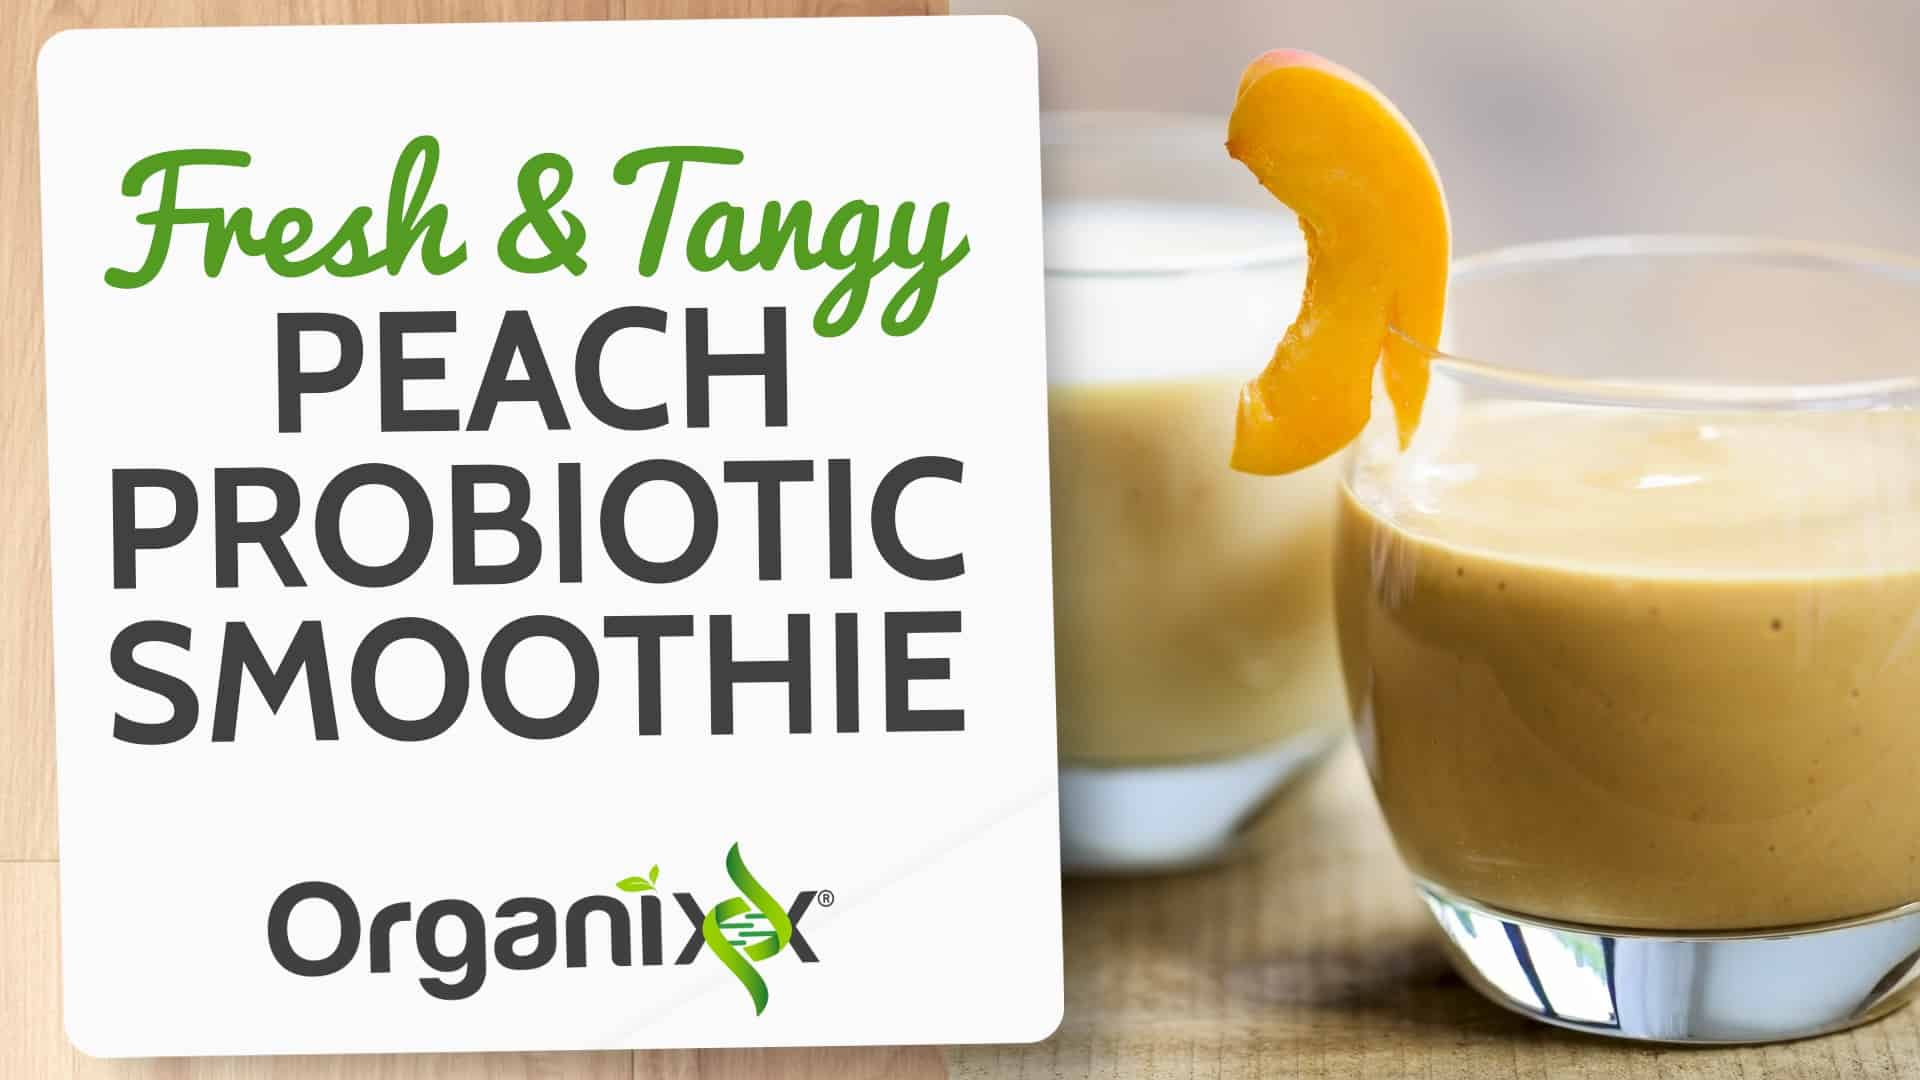 Fresh & Tangy Peach Probiotic Smoothie